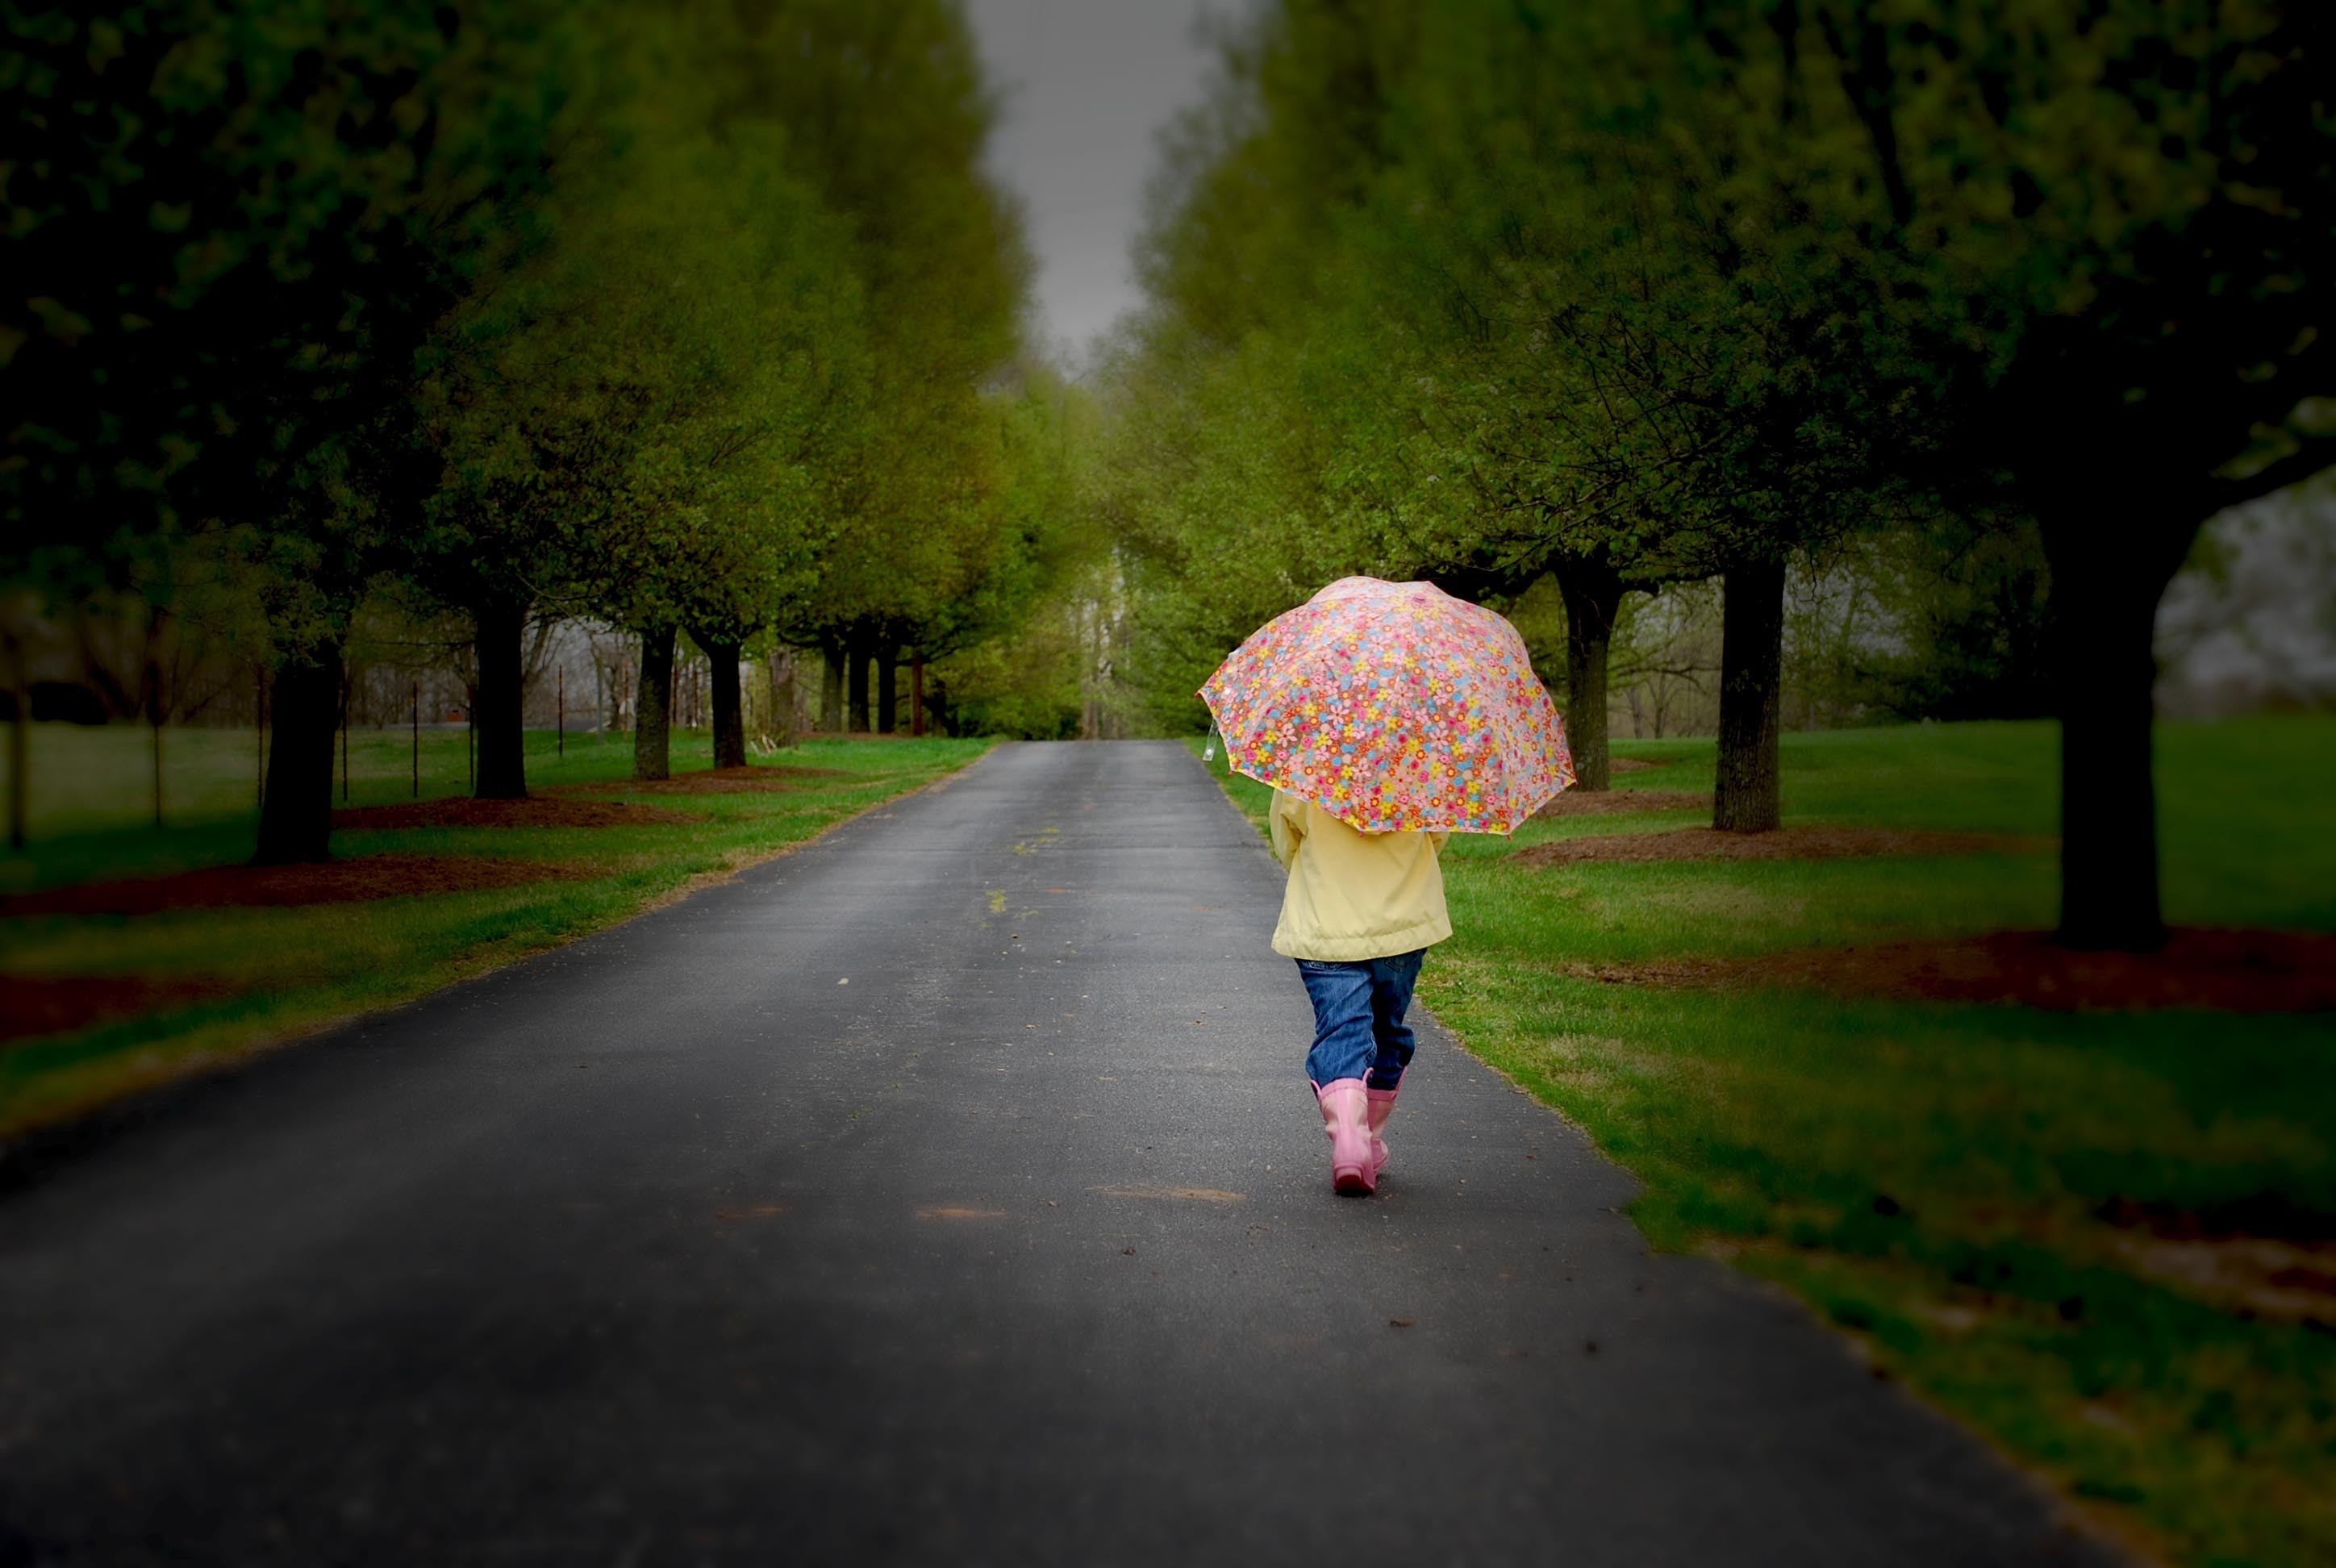 park, wood, miscellanea, miscellaneous, road, tree, stroll, overcast, mainly cloudy, umbrella